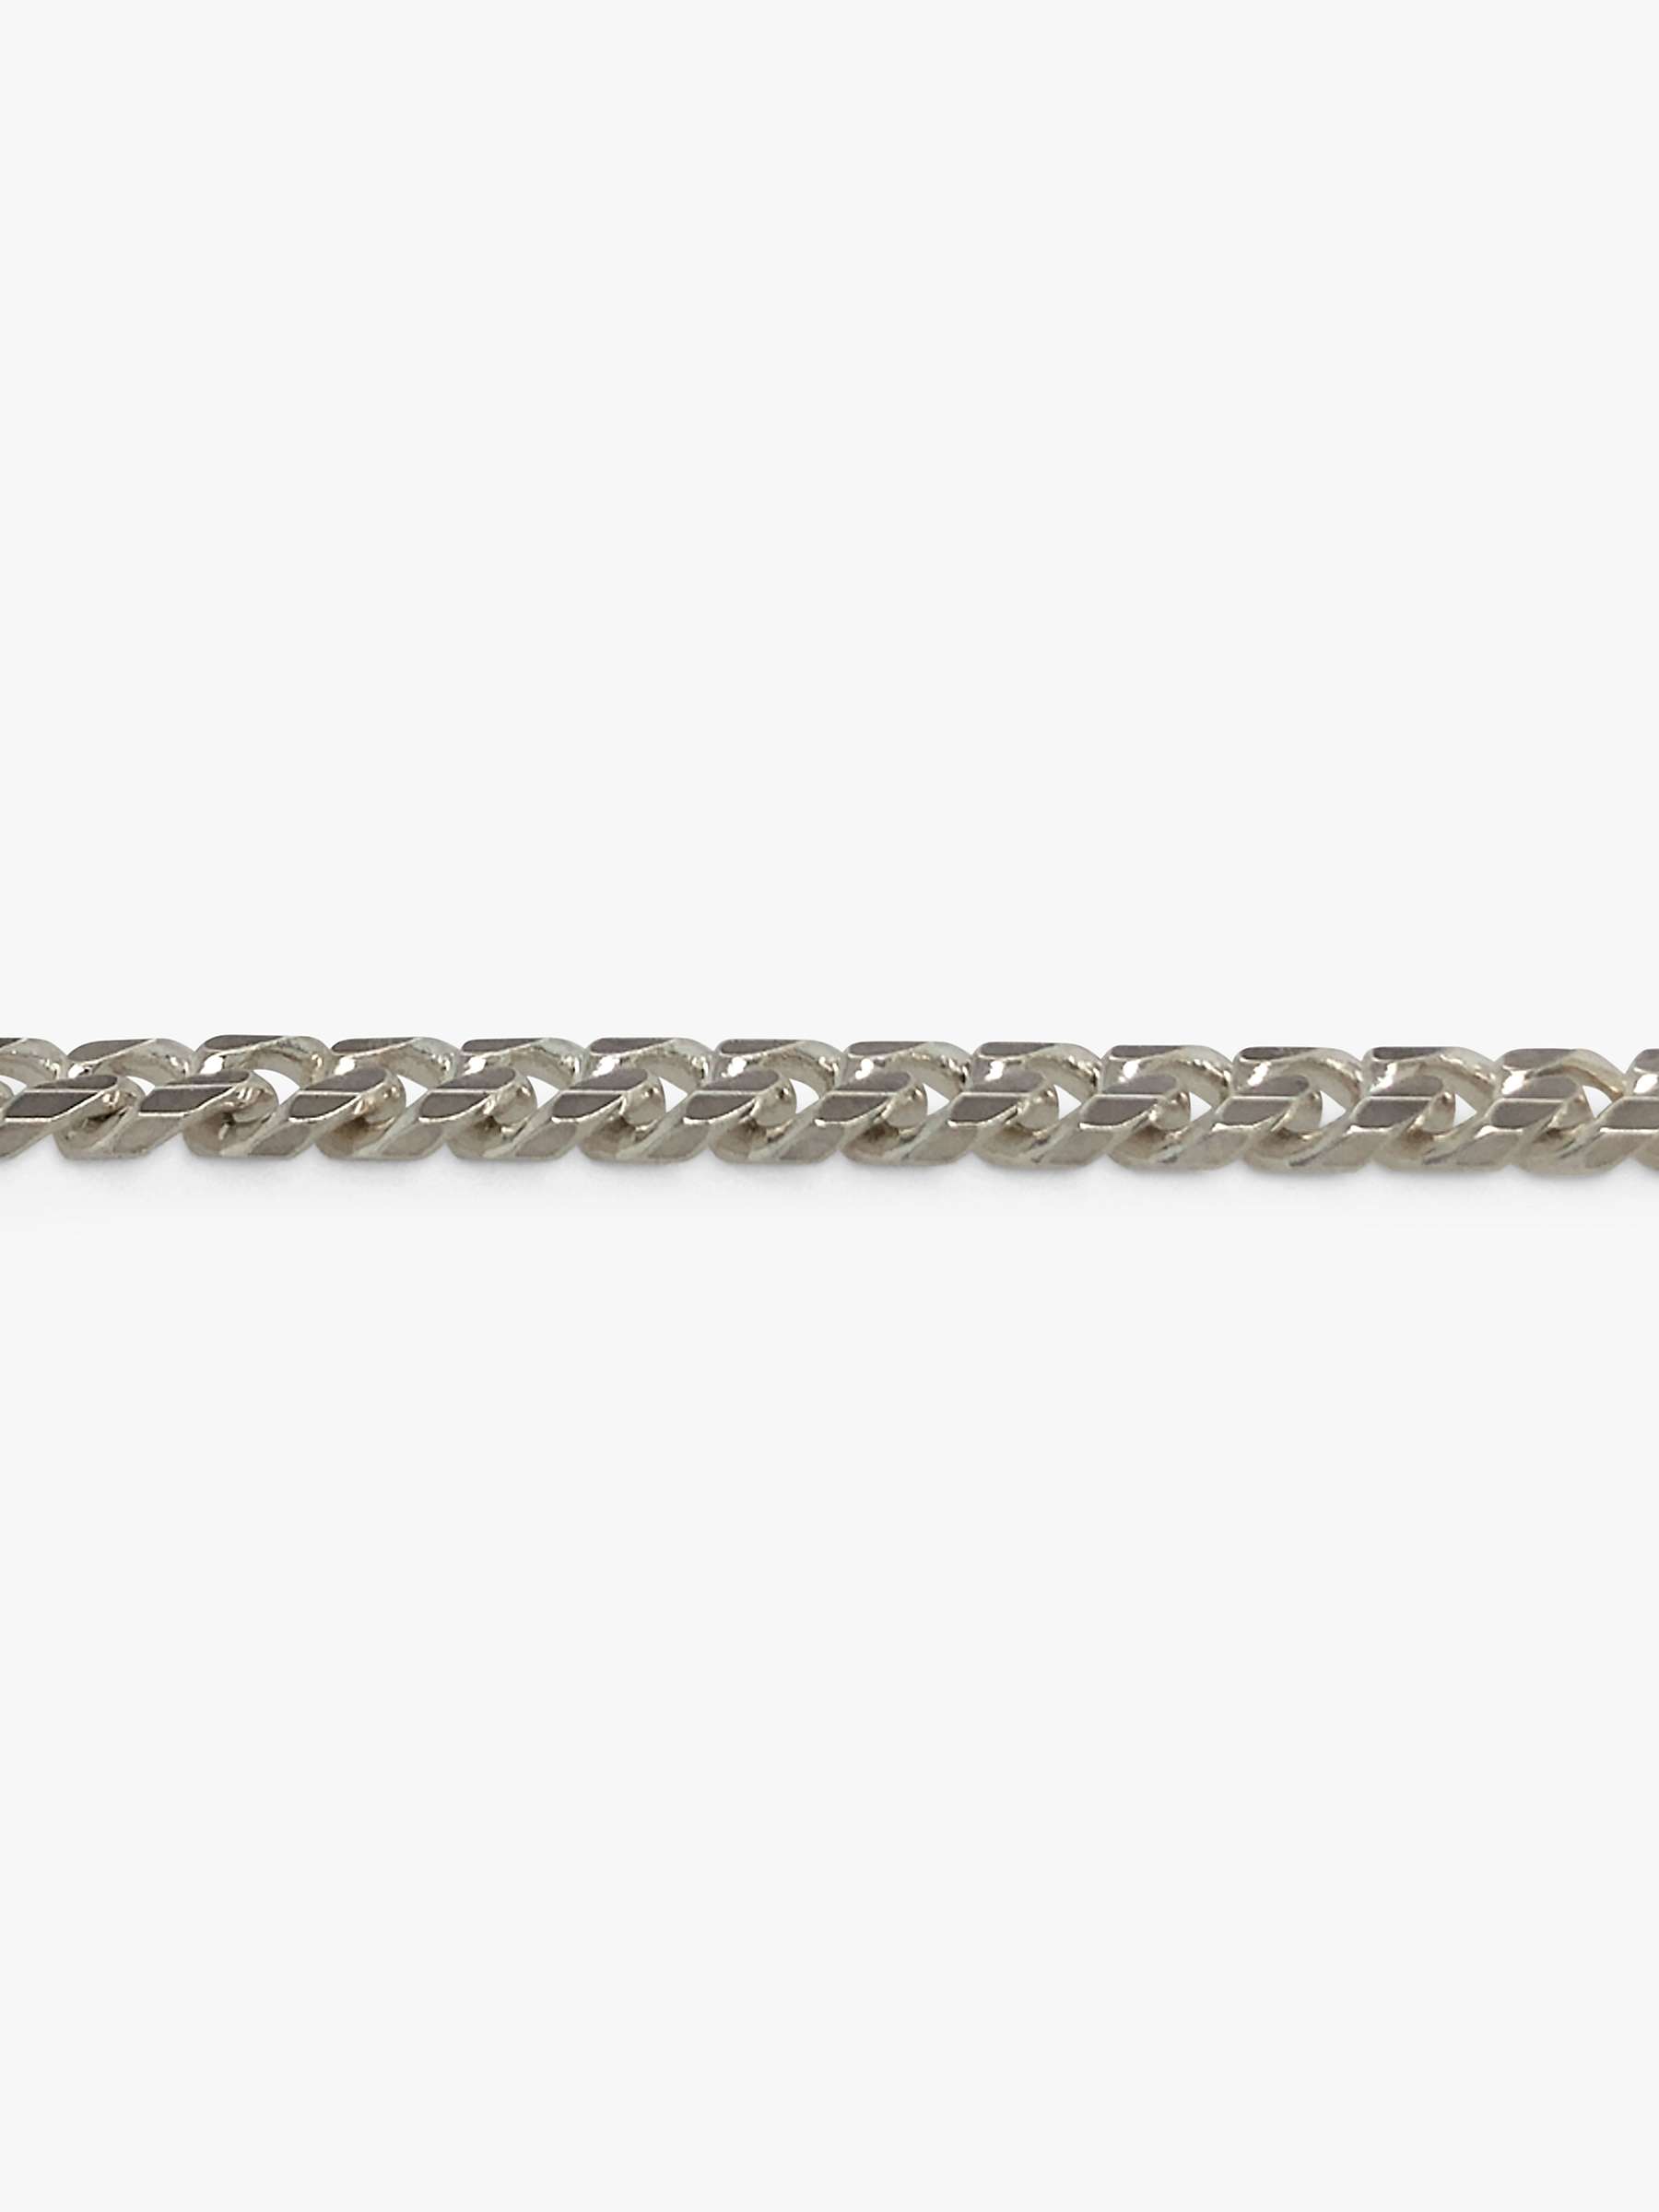 Buy Vintage Fine Jewellery Second Hand Flat Curb Link Chain Necklace, Dated Birmingham 2001 Online at johnlewis.com